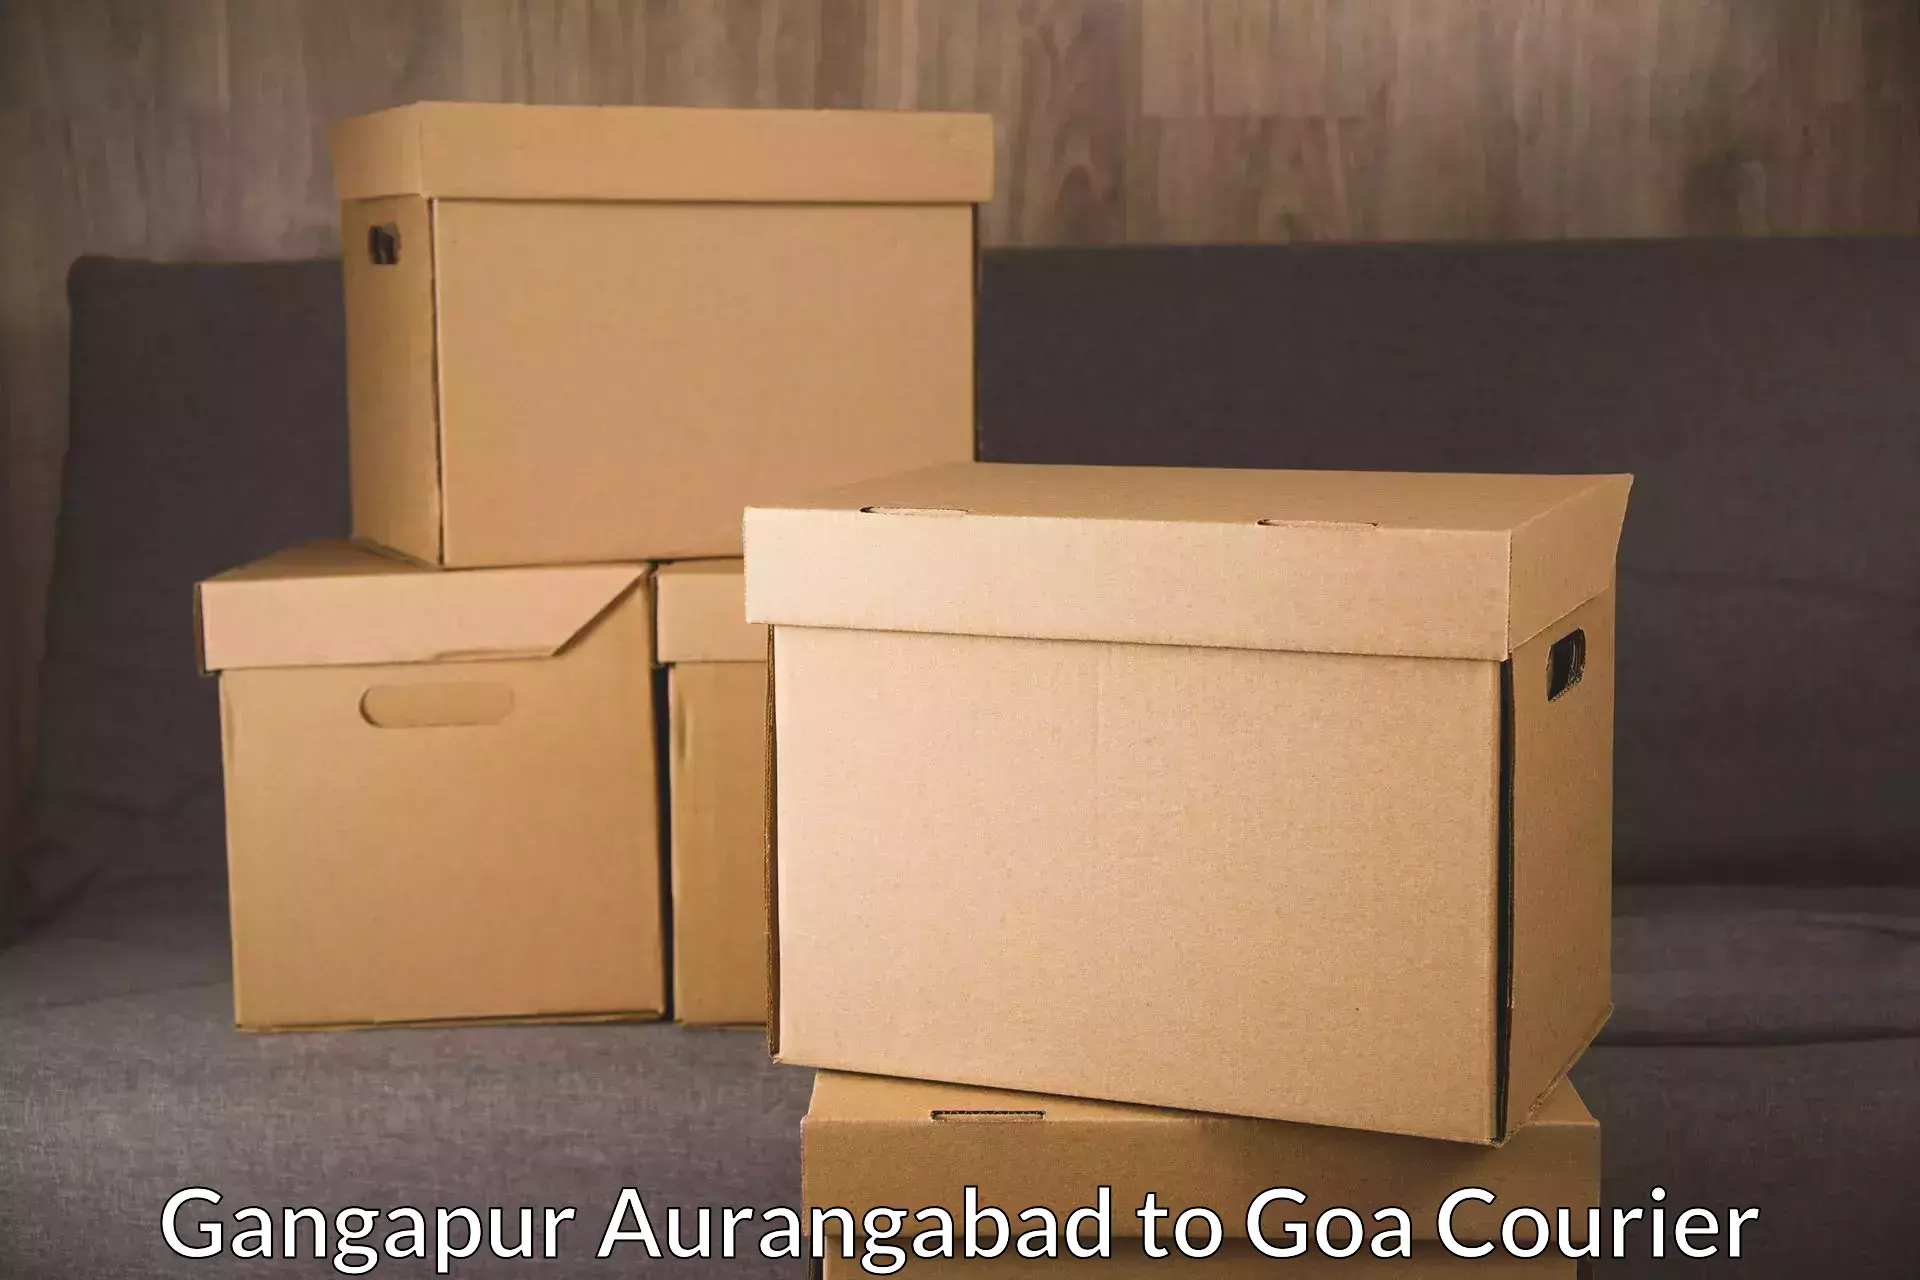 Express delivery capabilities in Gangapur Aurangabad to South Goa